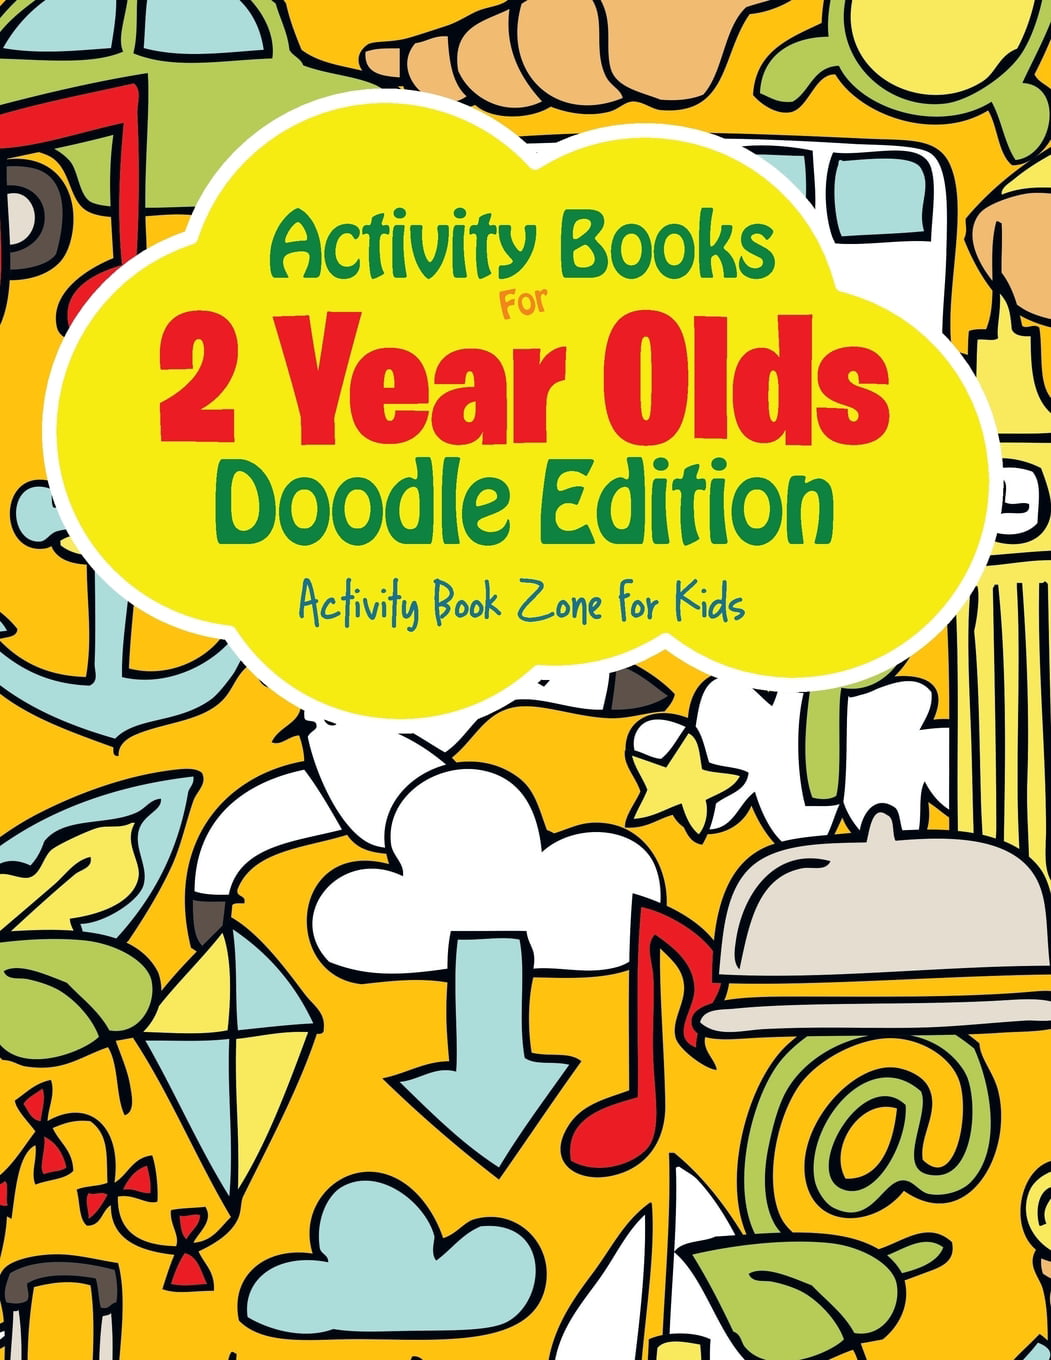 activity-books-for-2-year-olds-doodle-edition-paperback-walmart